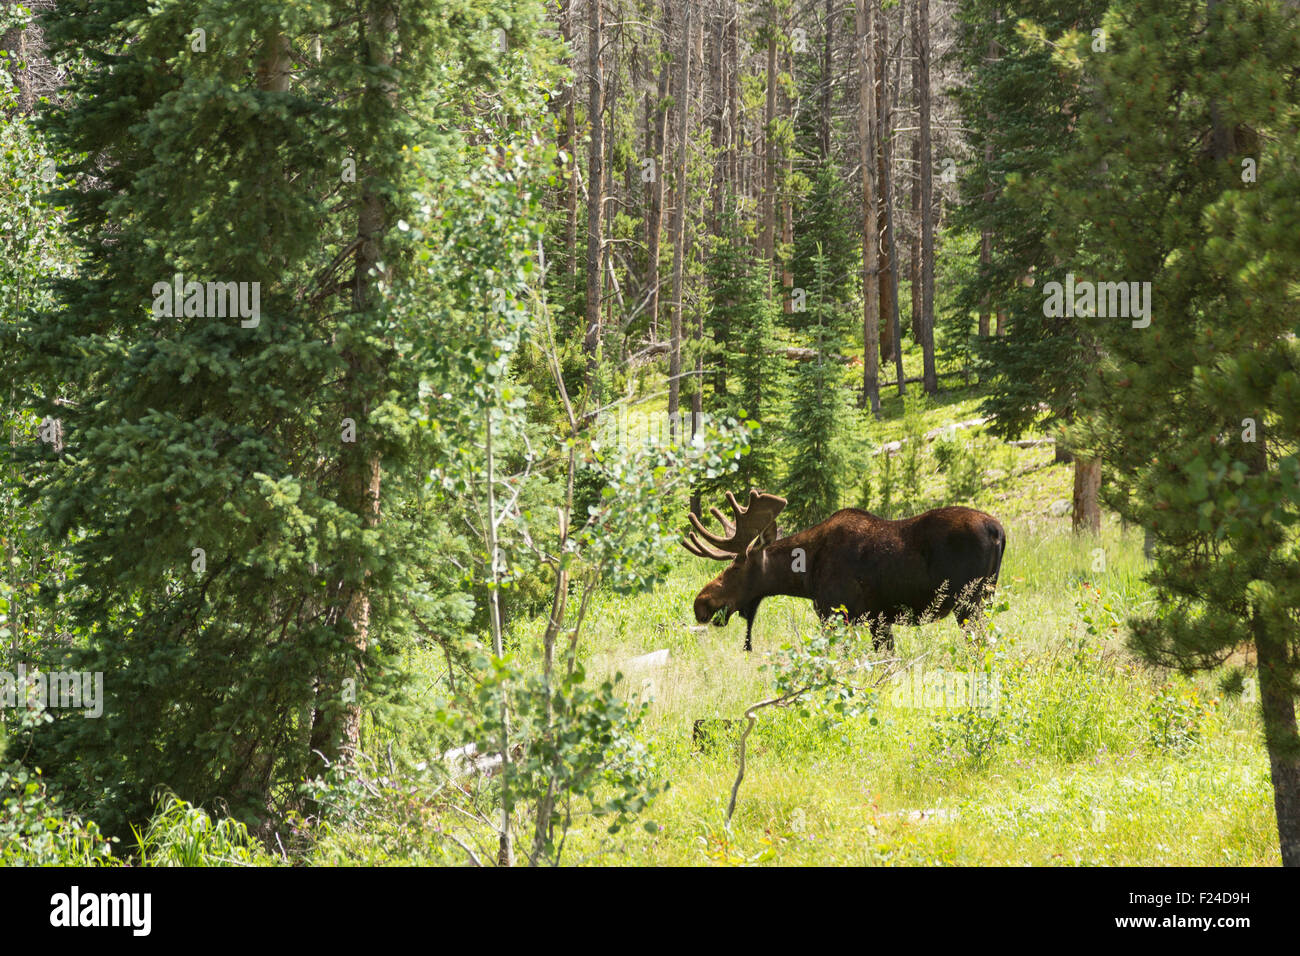 Silverthorne, Colorado - A bull moose grazing in Eagles Nest Wilderness Area, part of White River National Forest. Stock Photo